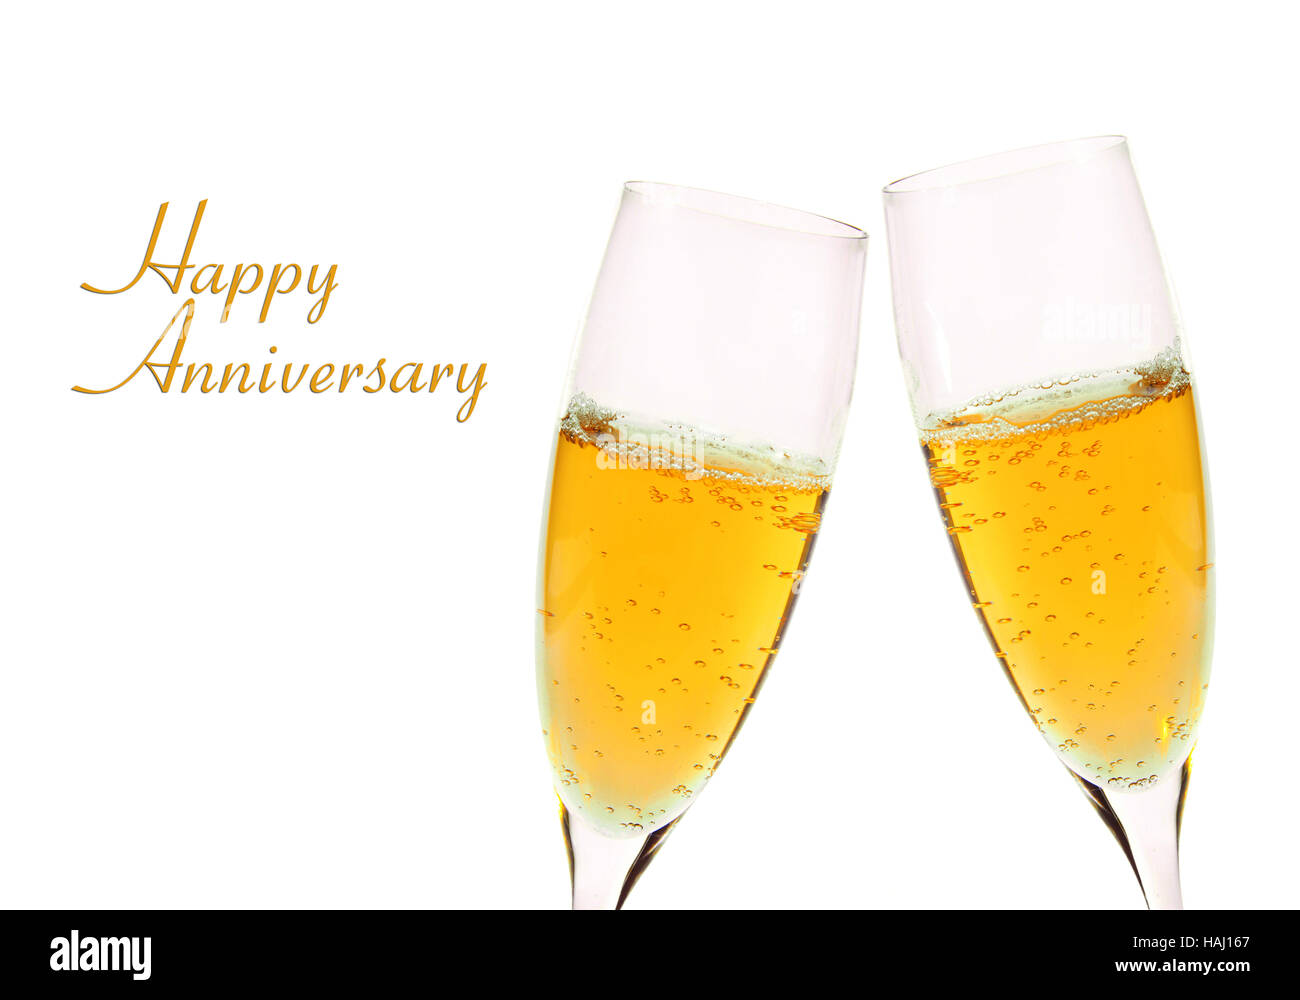 celebrate anniversary with glass of champagne Stock Photo